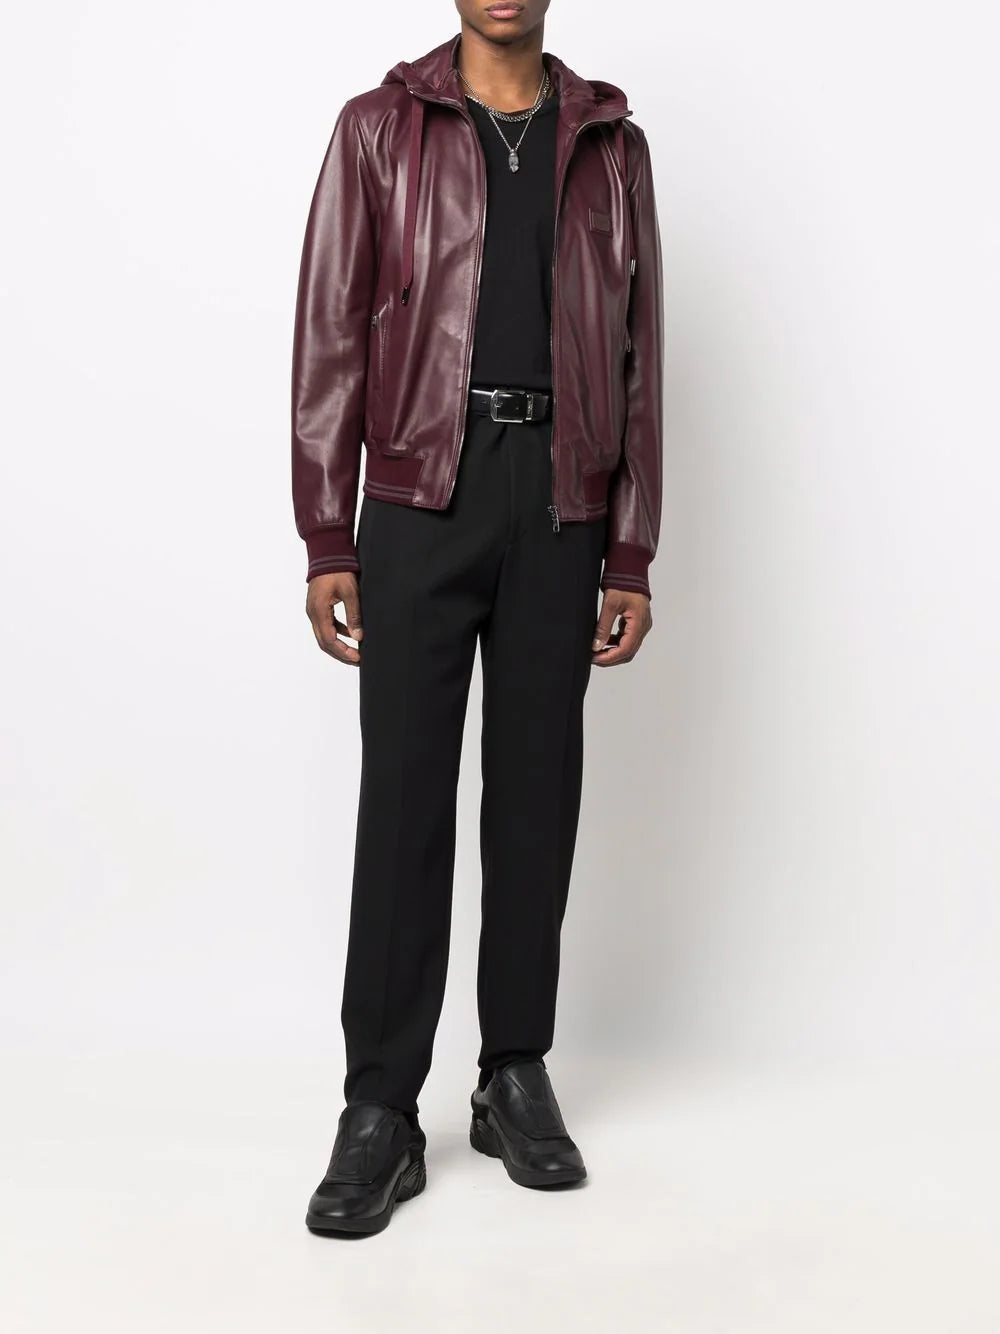 Cherry-Hooded leather jacket